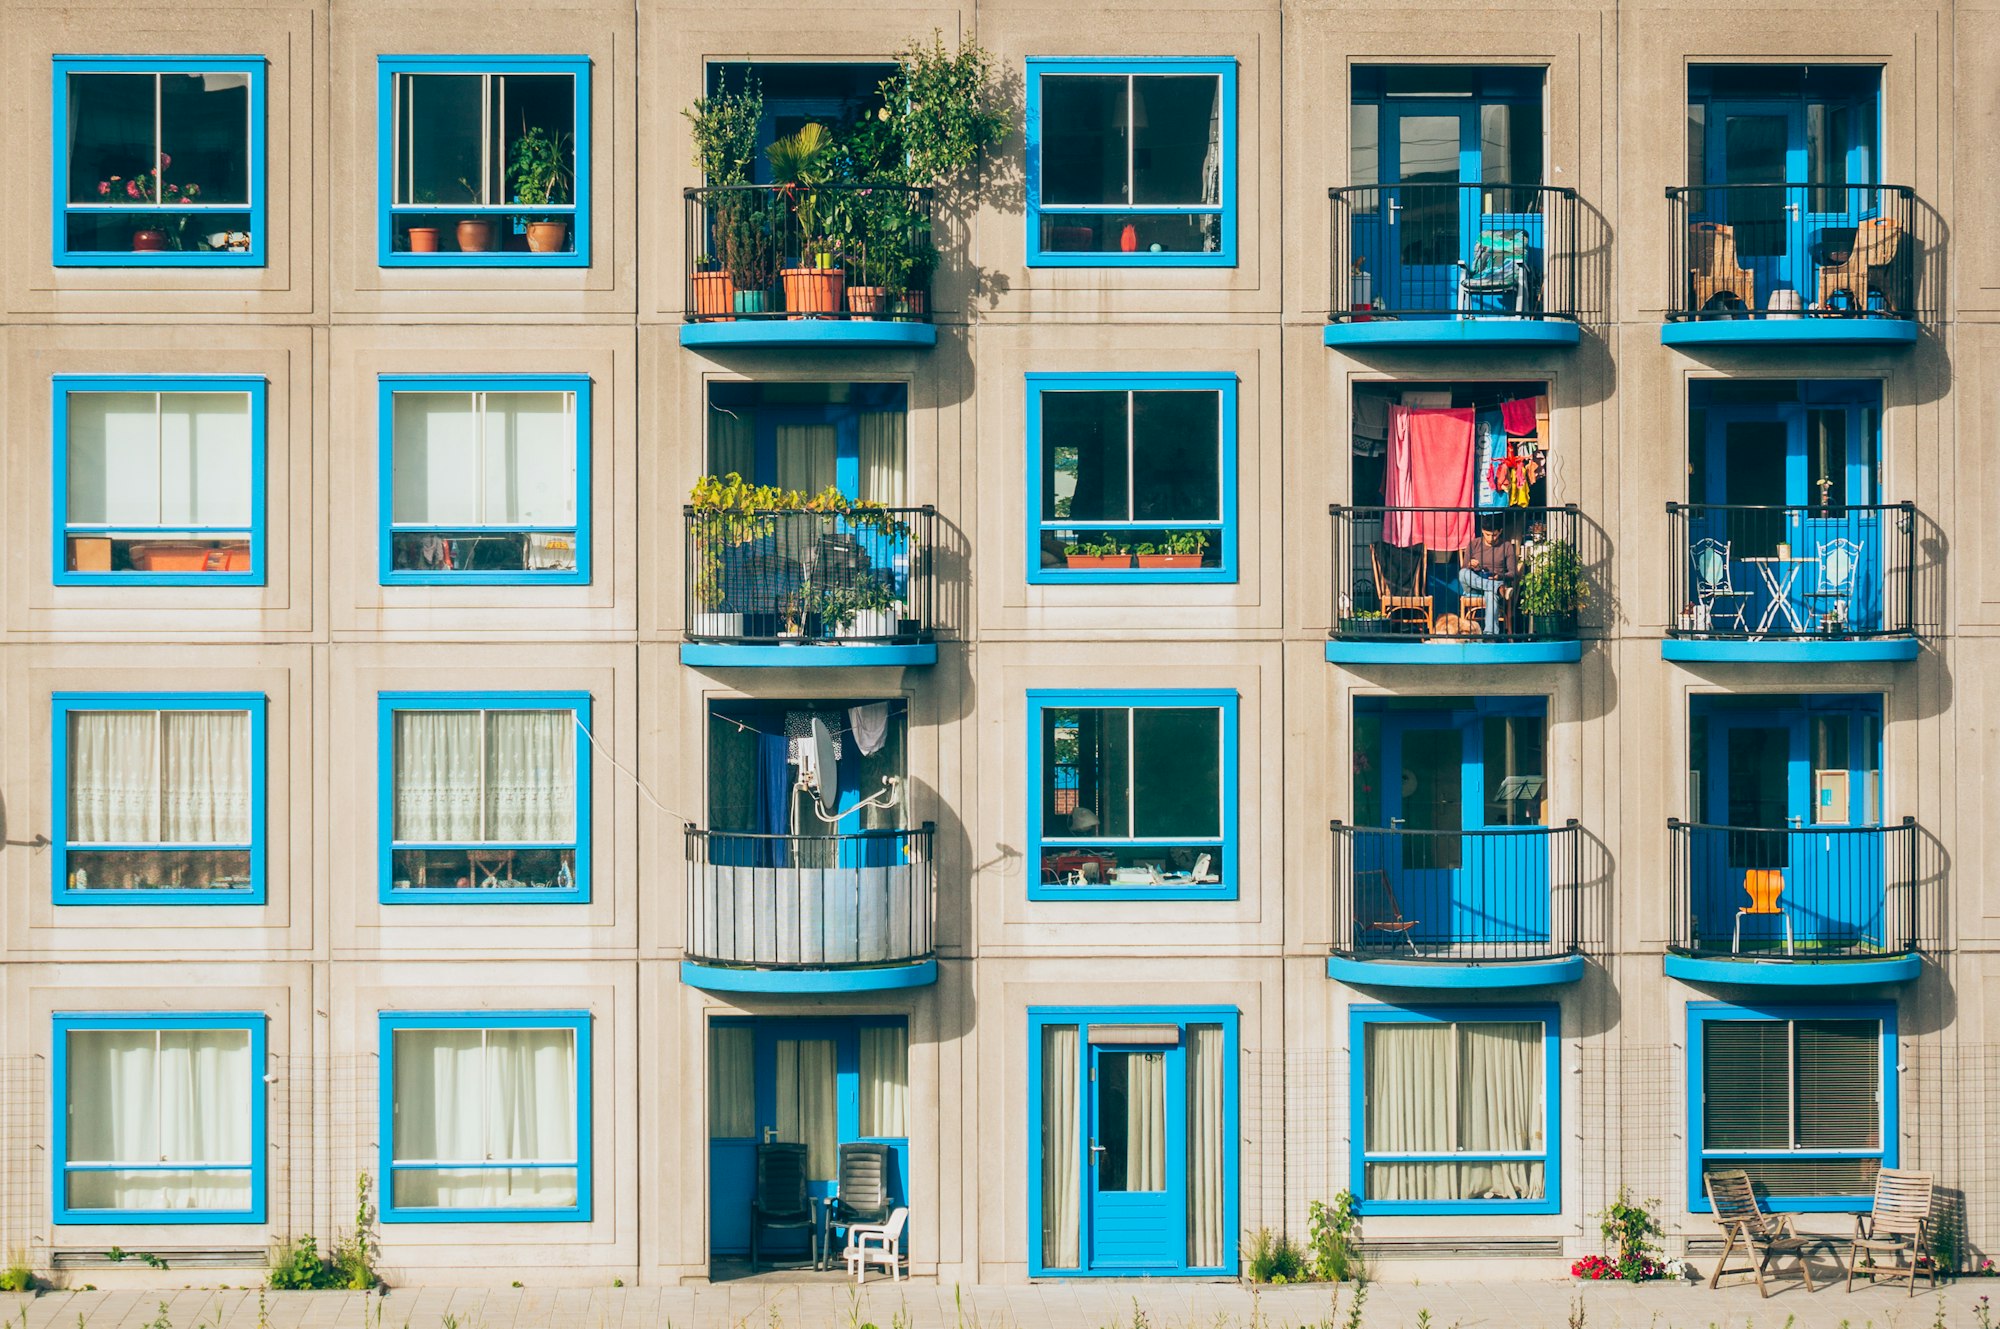 A snapshot of an apartment building with baby-blue colored window frames